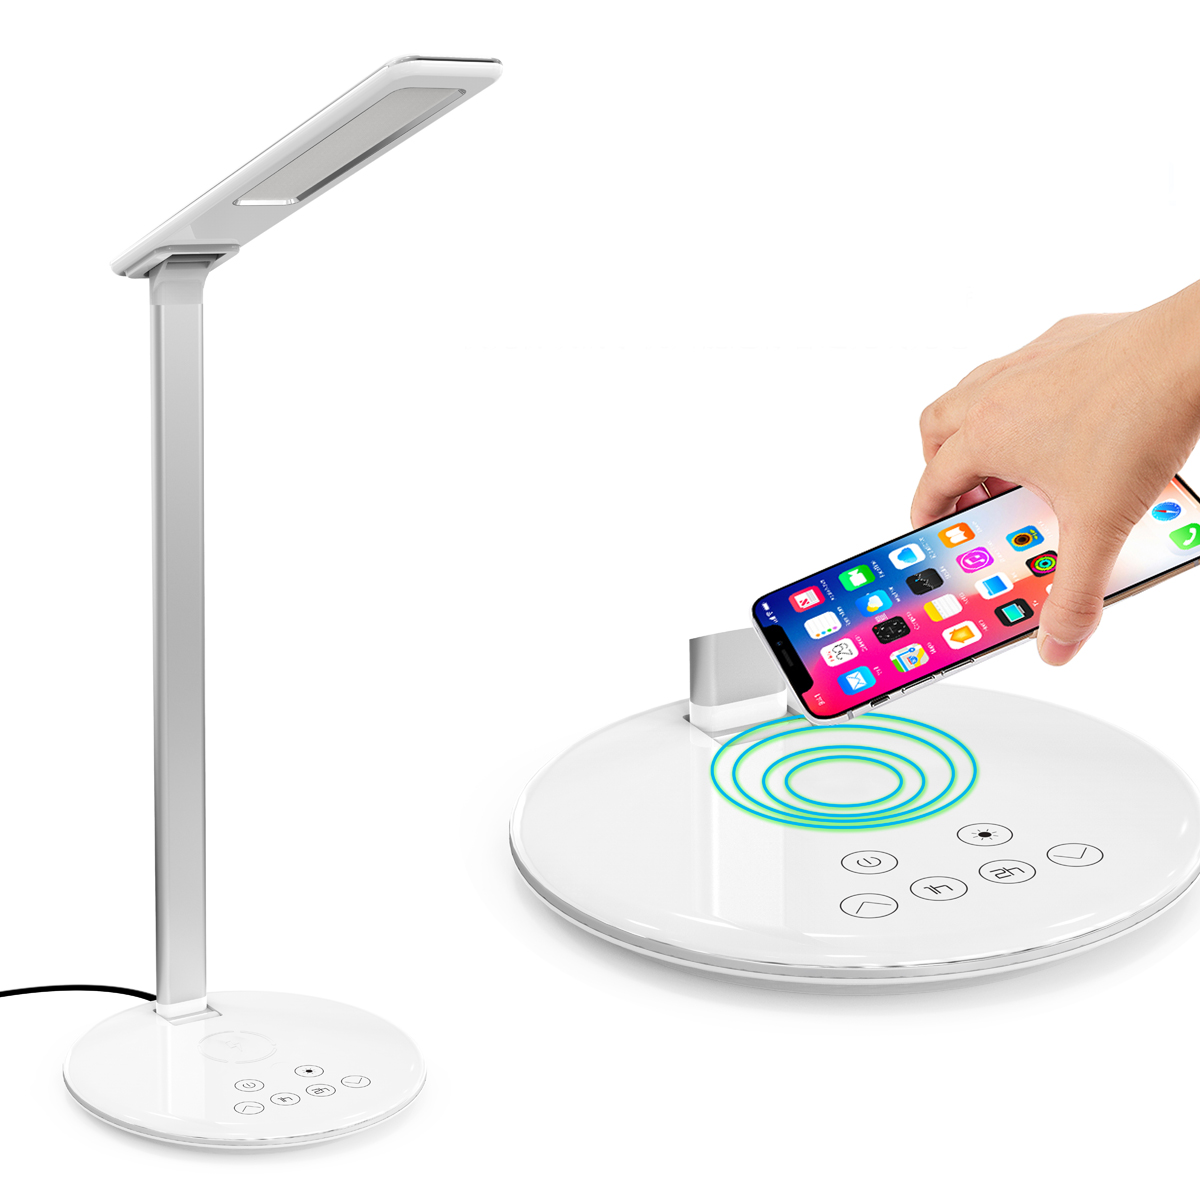 

10W Qi Wireless Charger LED Desk Lamp Phone Holder For iPhone XS Max XS 8 Plus Samsung Galaxy S10 Plus Huawei P30 Pro Al